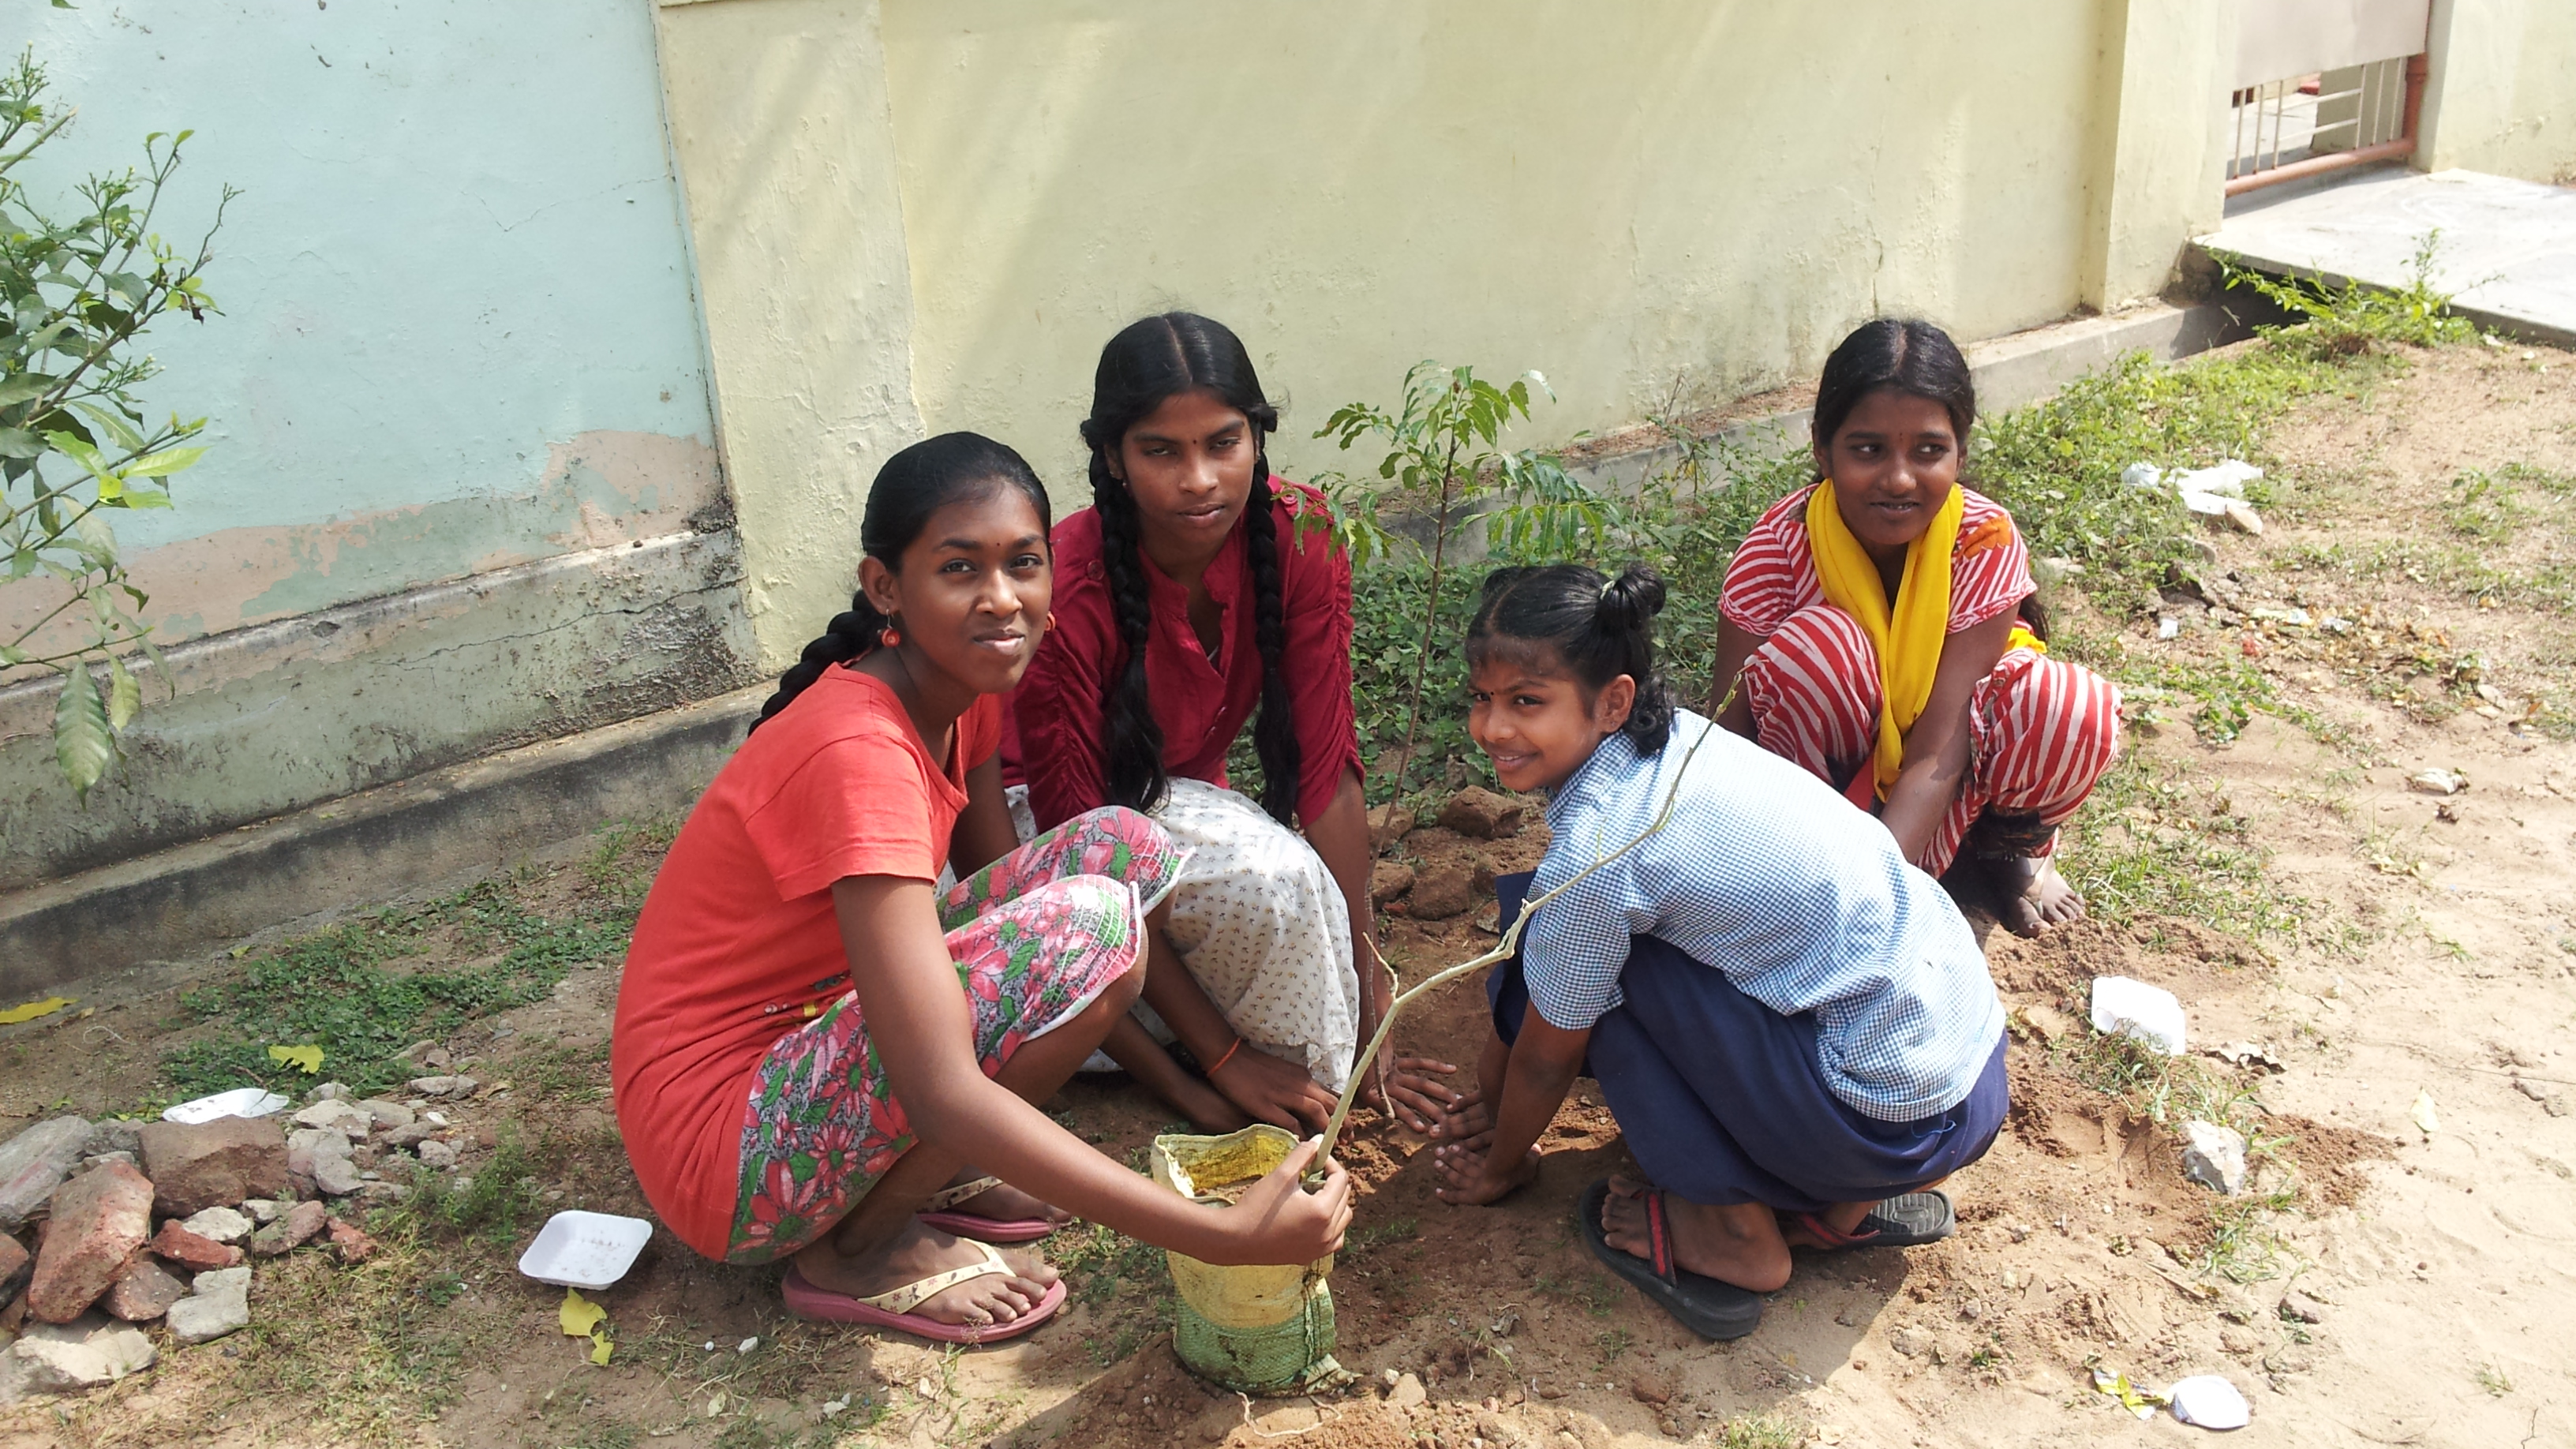 Children planting a sapling by the roadside